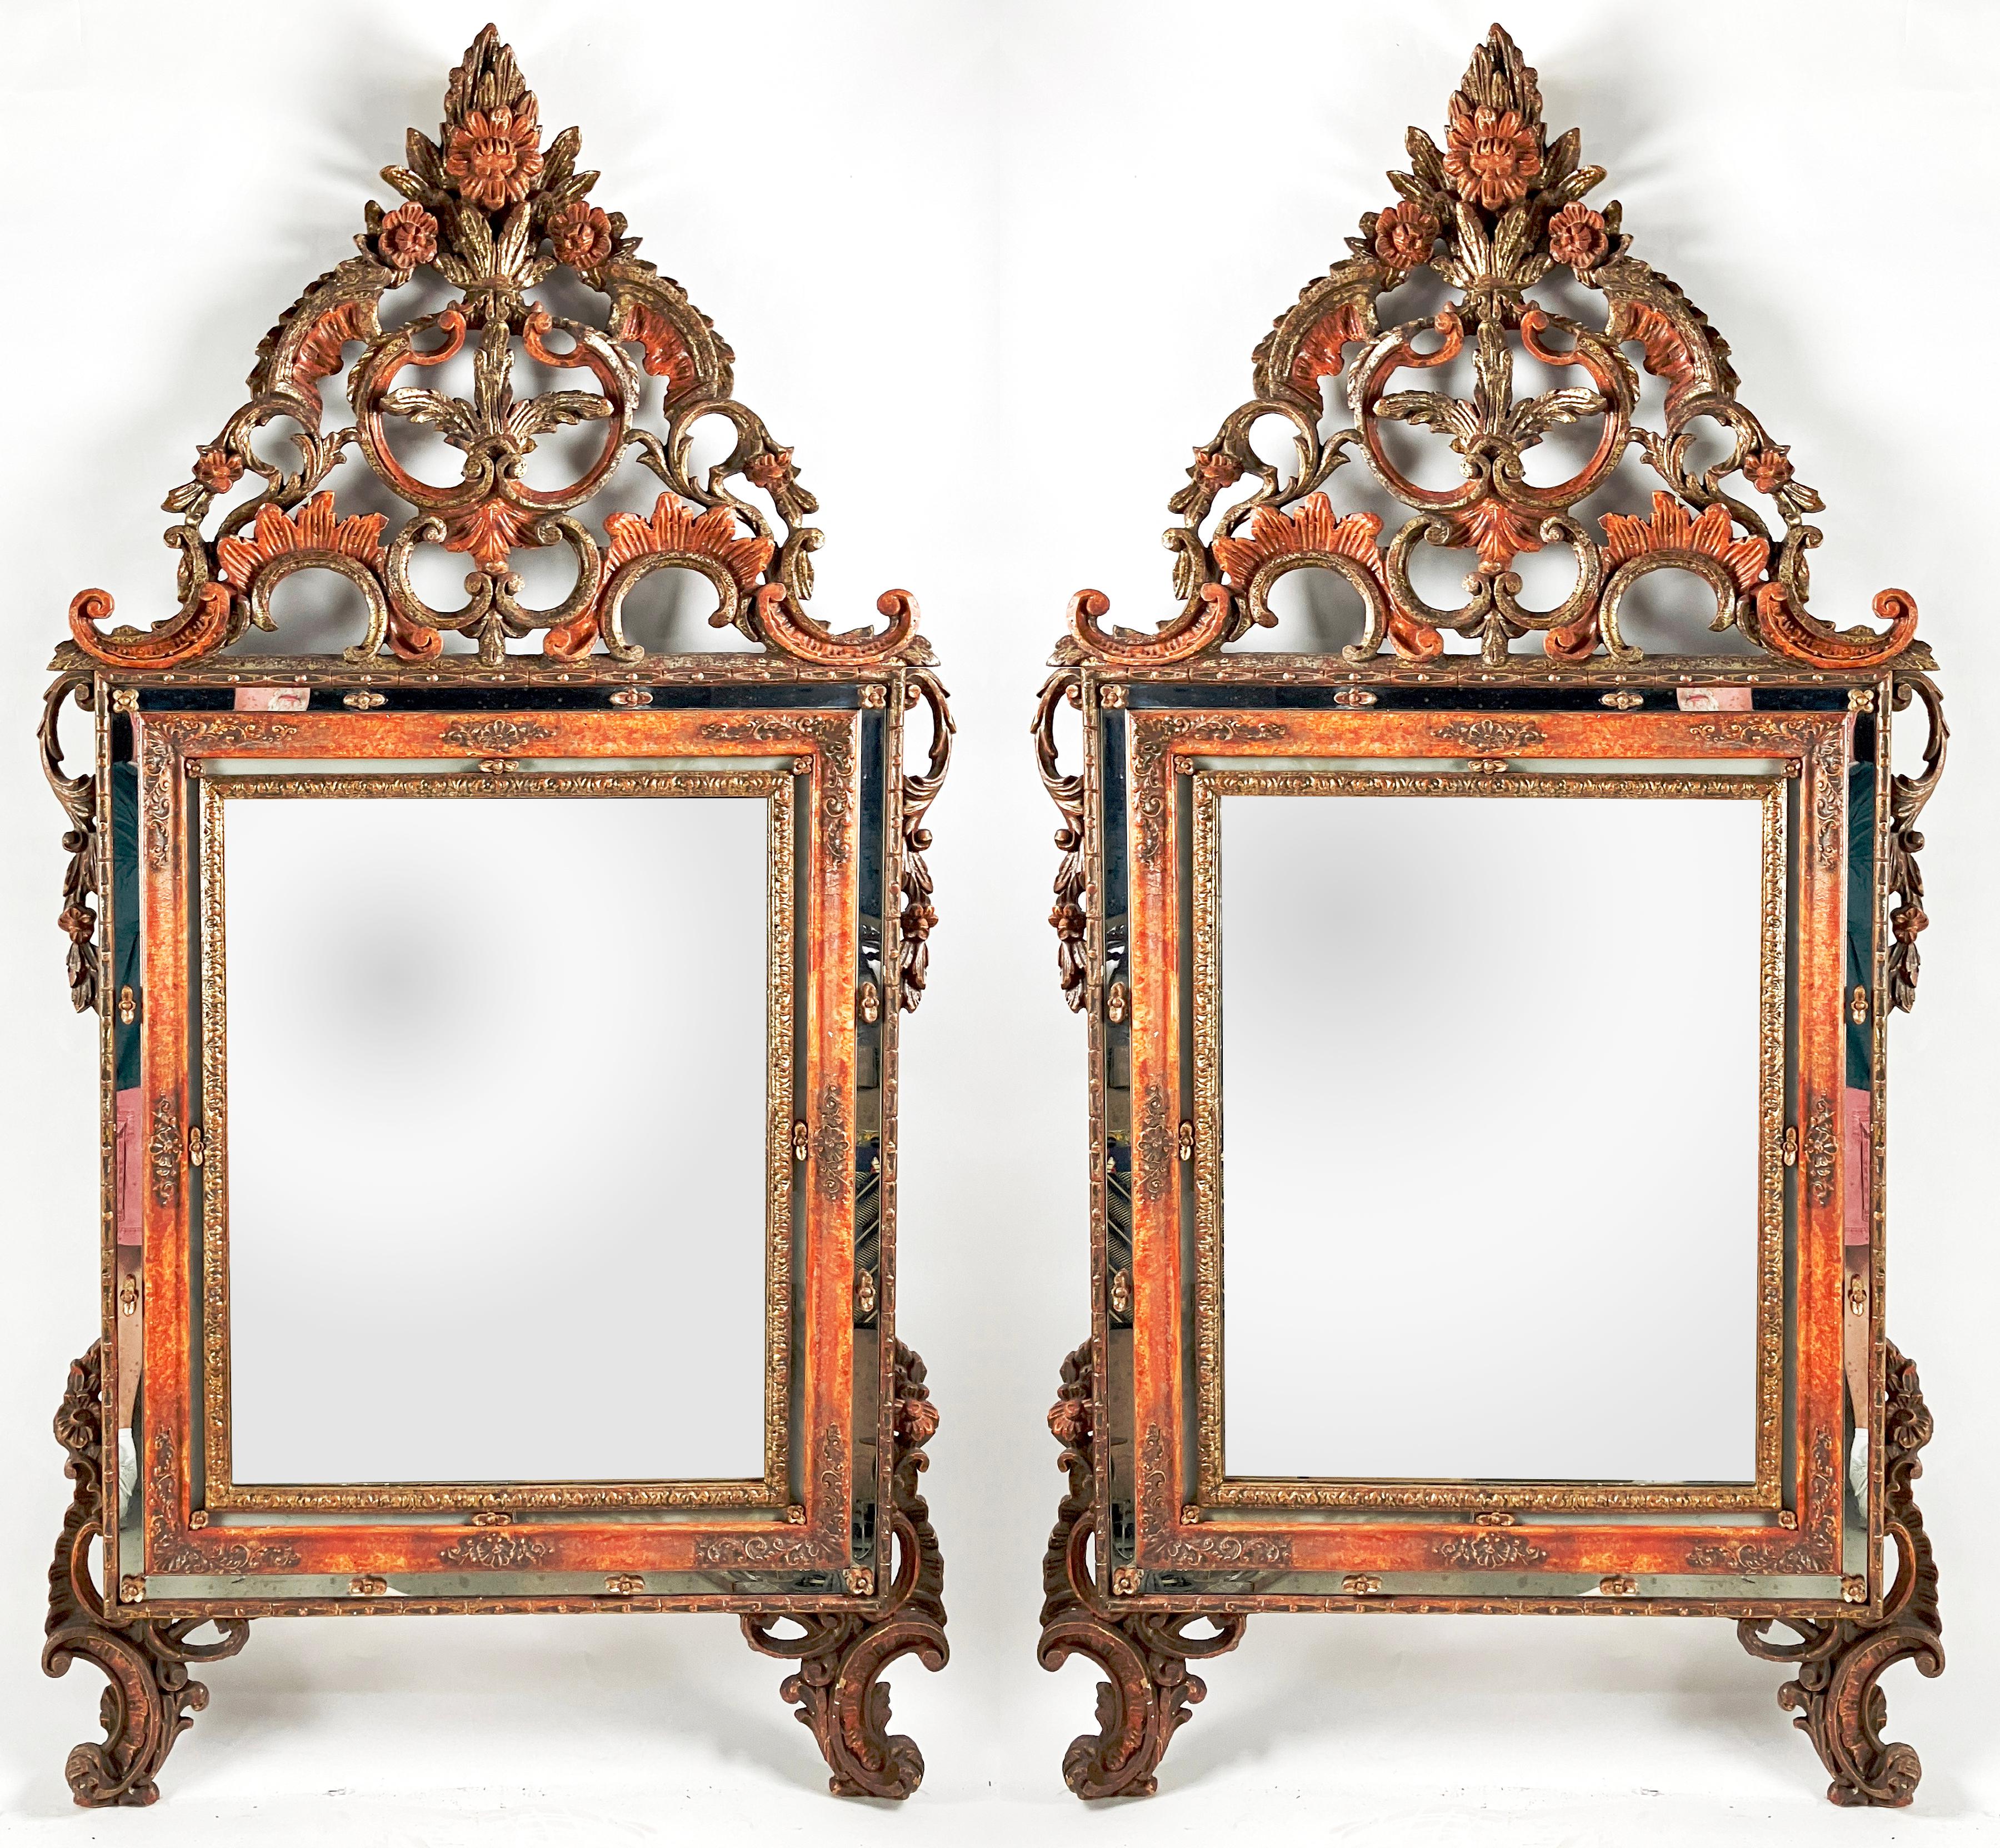 

Hand-crafted in Italy in the early 1800s, this pair of polychrome Venetian mirrors have gilded carvings offset by floral paint. The shaped mirrors are surrounded by a border festooned with repeating applied decorations. There is a gilt-raised